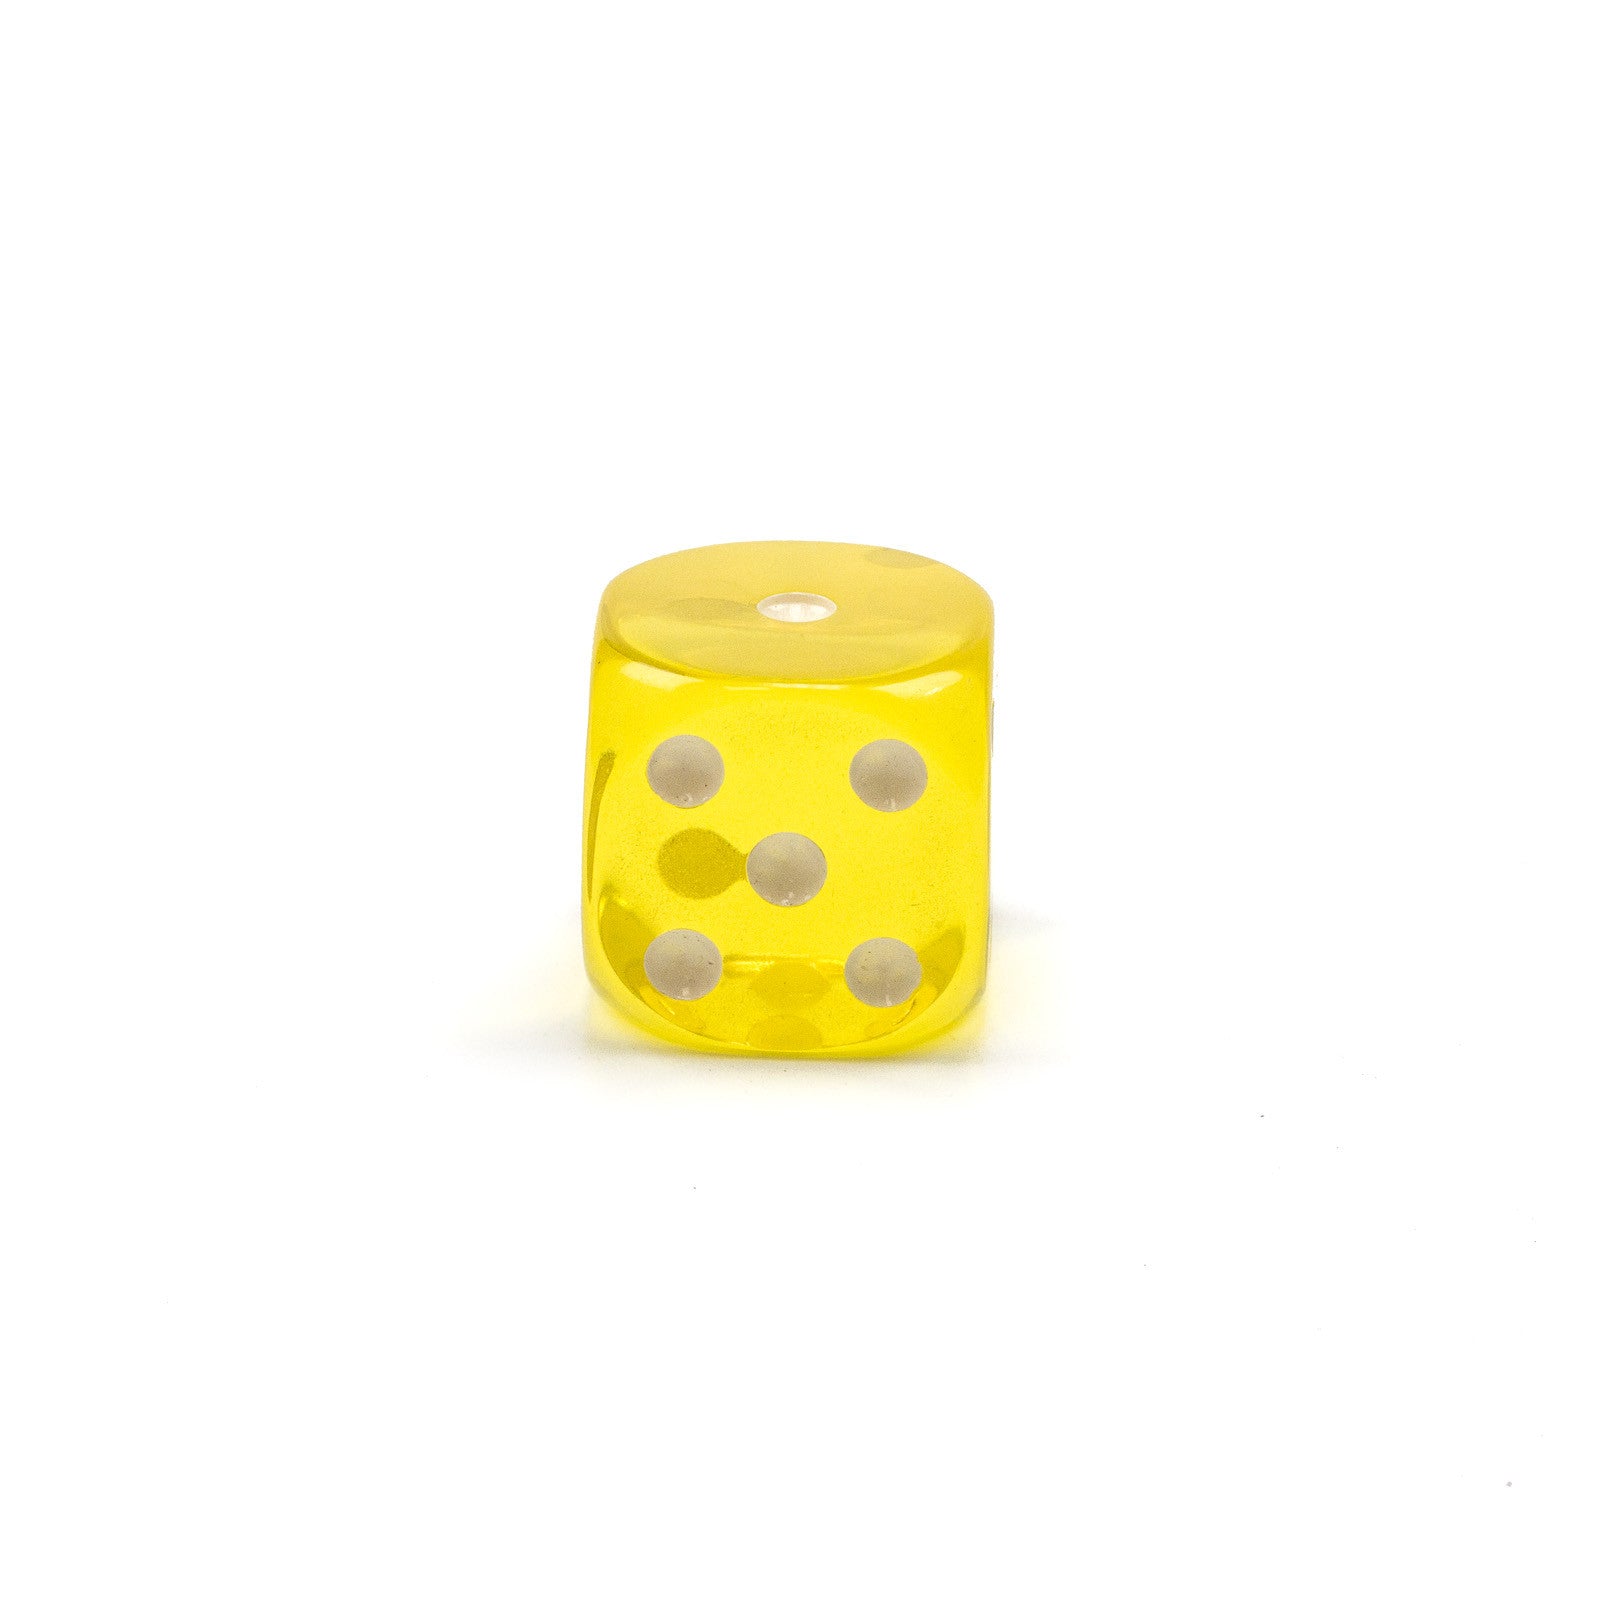 Acrylic Transparent Dice - 30 mm / 1.25 inch -  Sold Individually